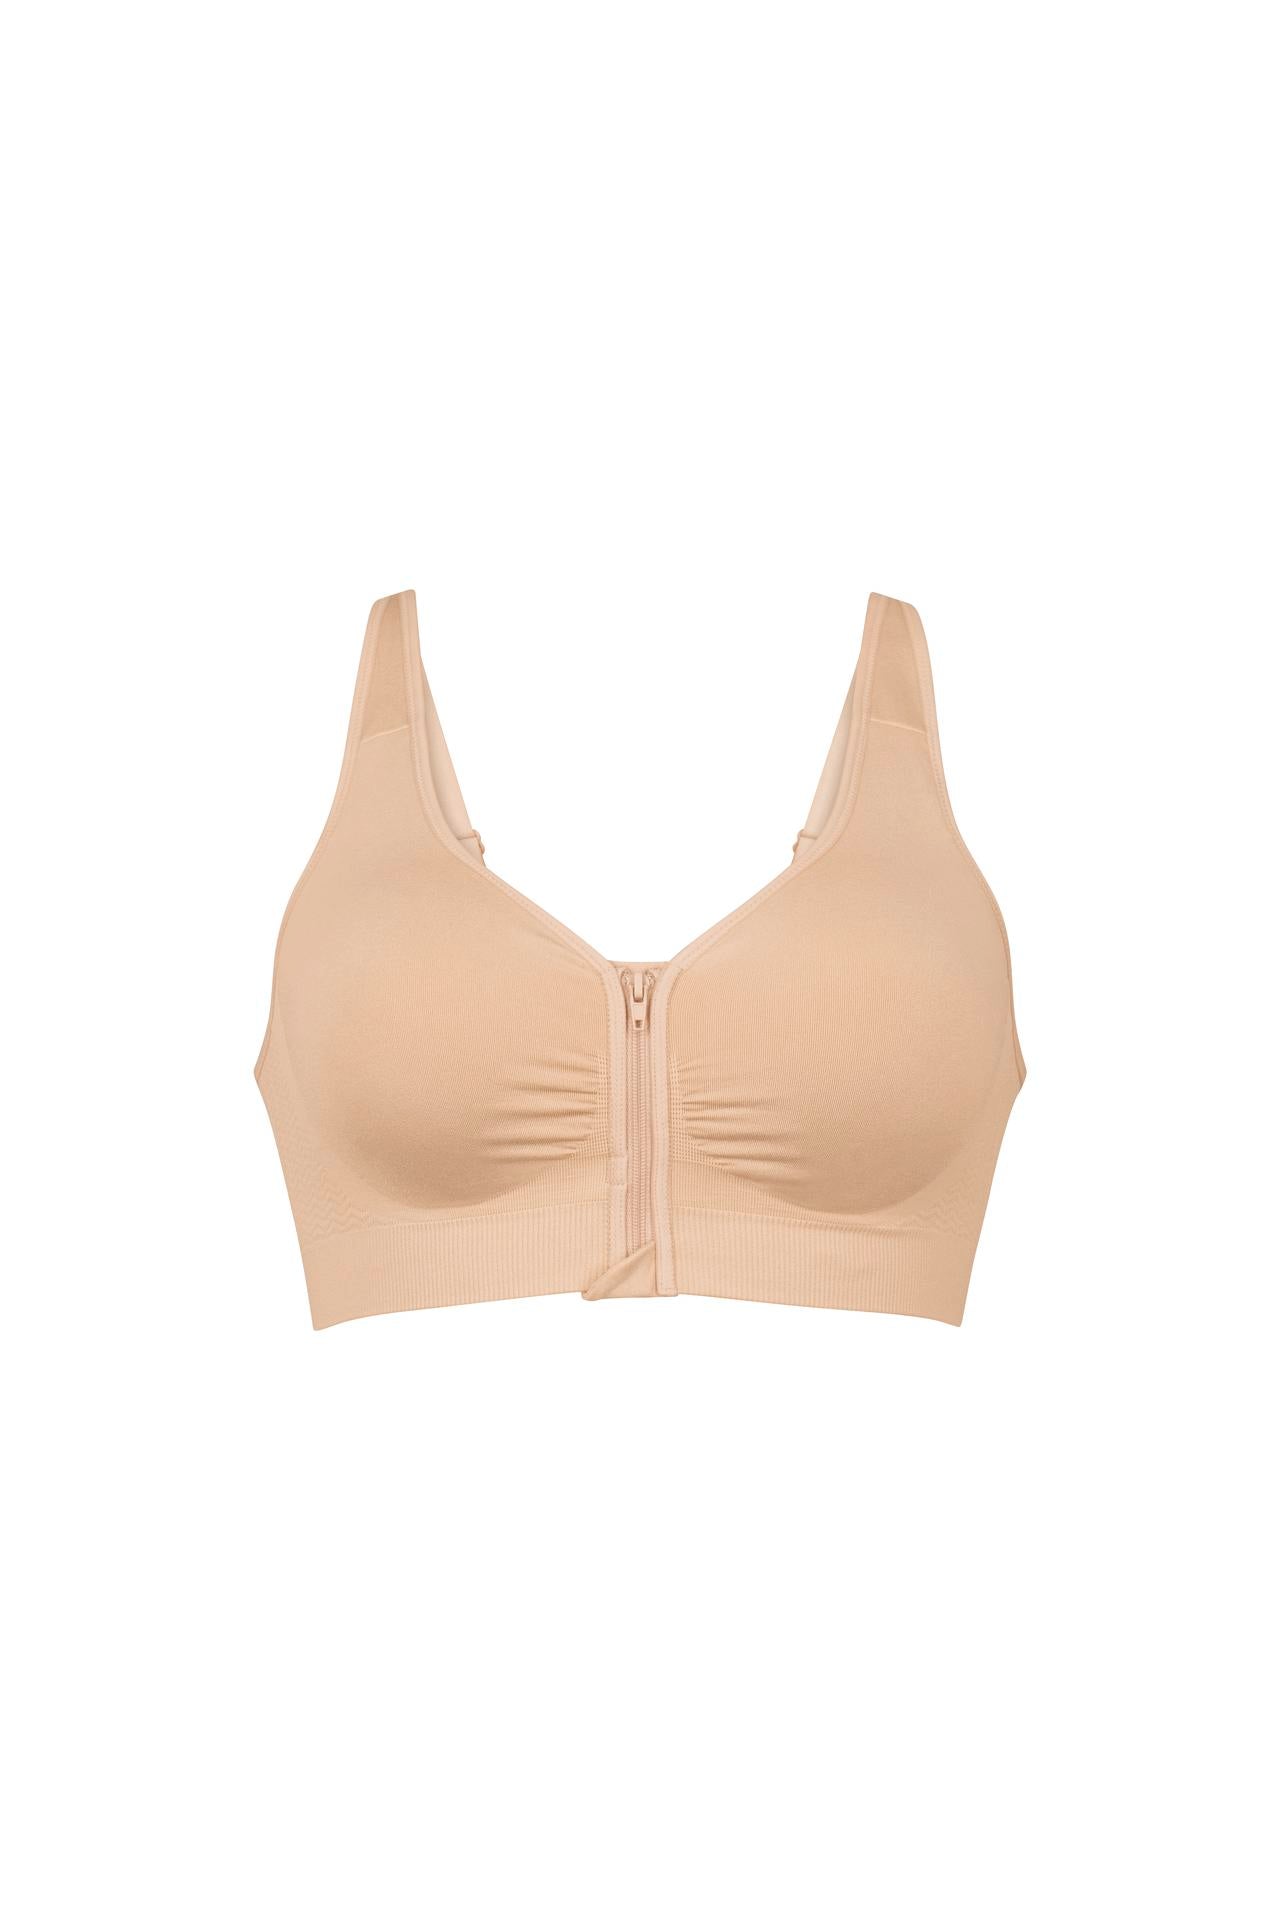 Lynn Front Closure Non Wired Bra - Pinned Up Bra Lounge